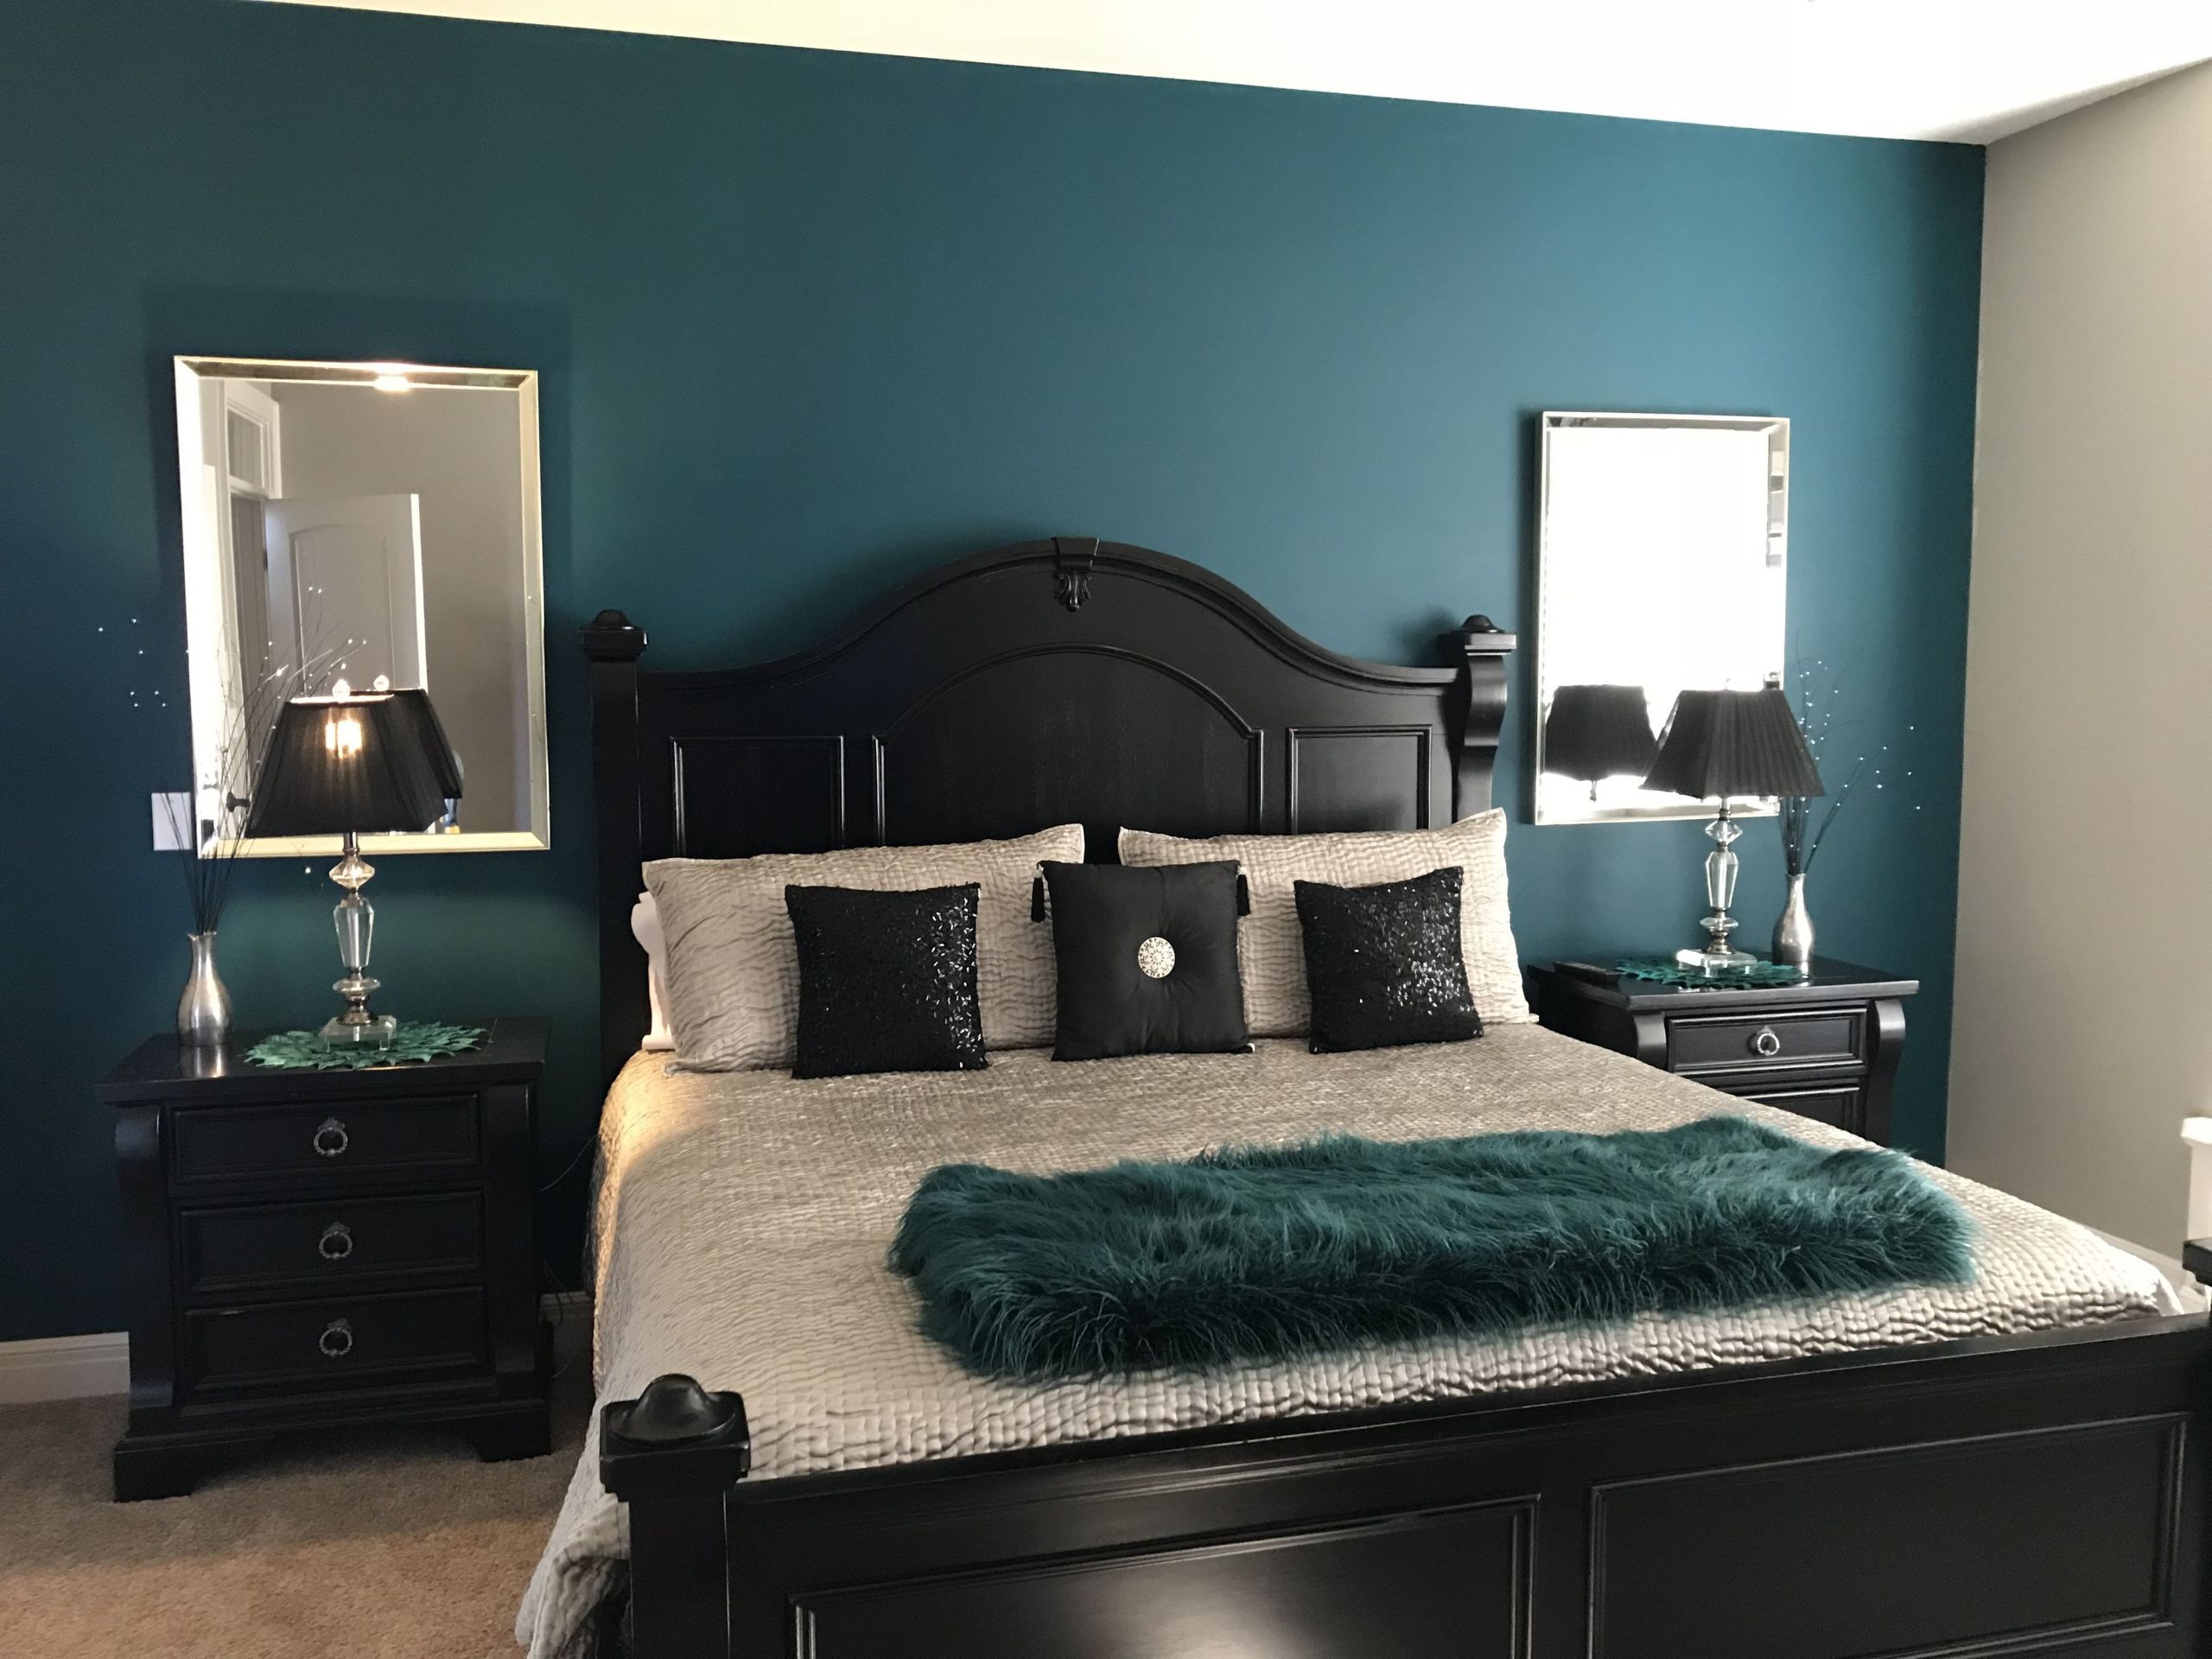 Teal Accent Wall Bedroom
 Dramatic accent wall in master bedroom Love the teal